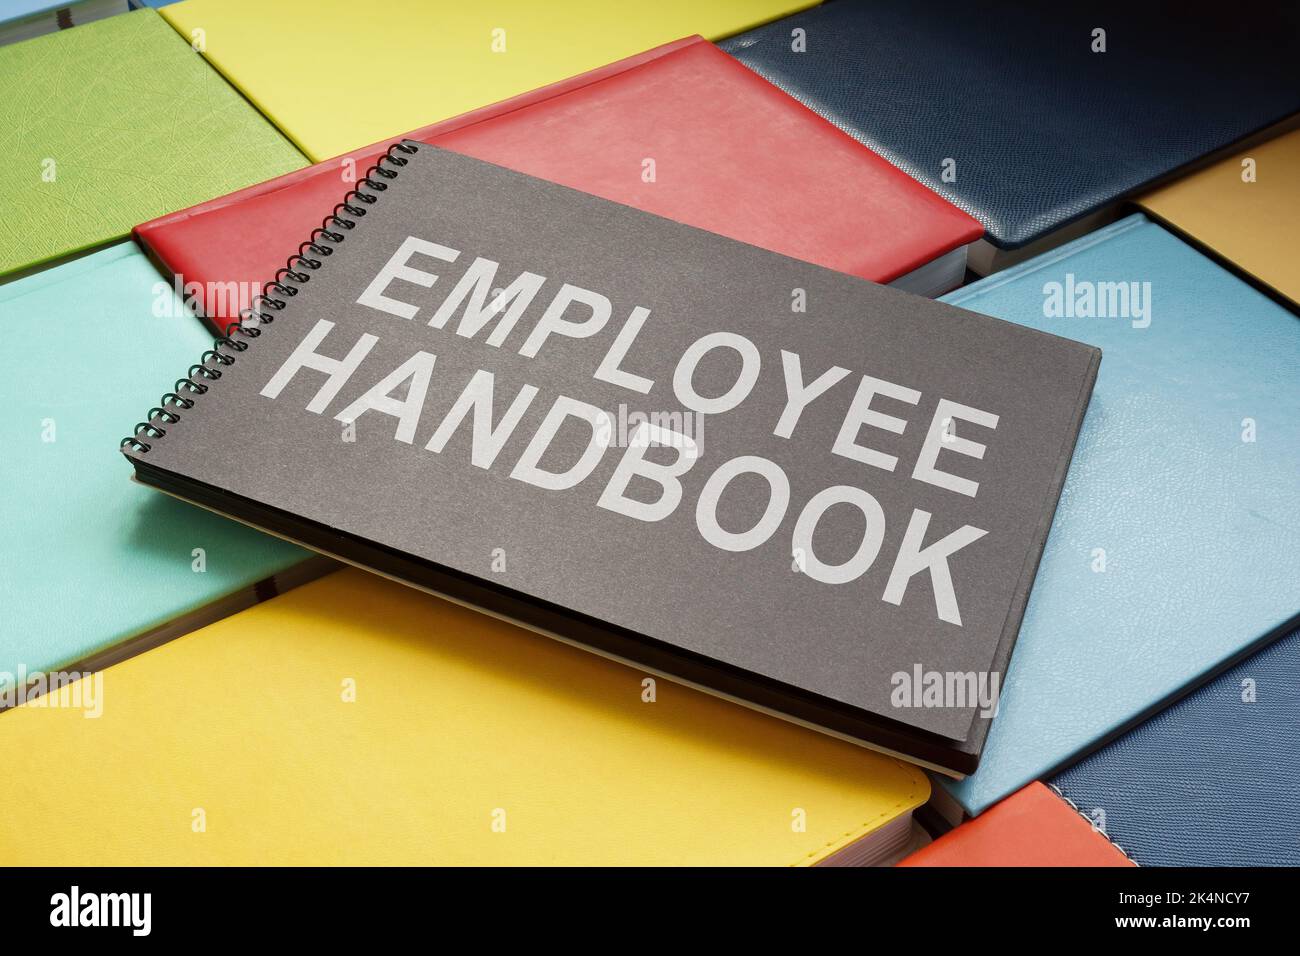 An employee handbook on the colorful books. Stock Photo